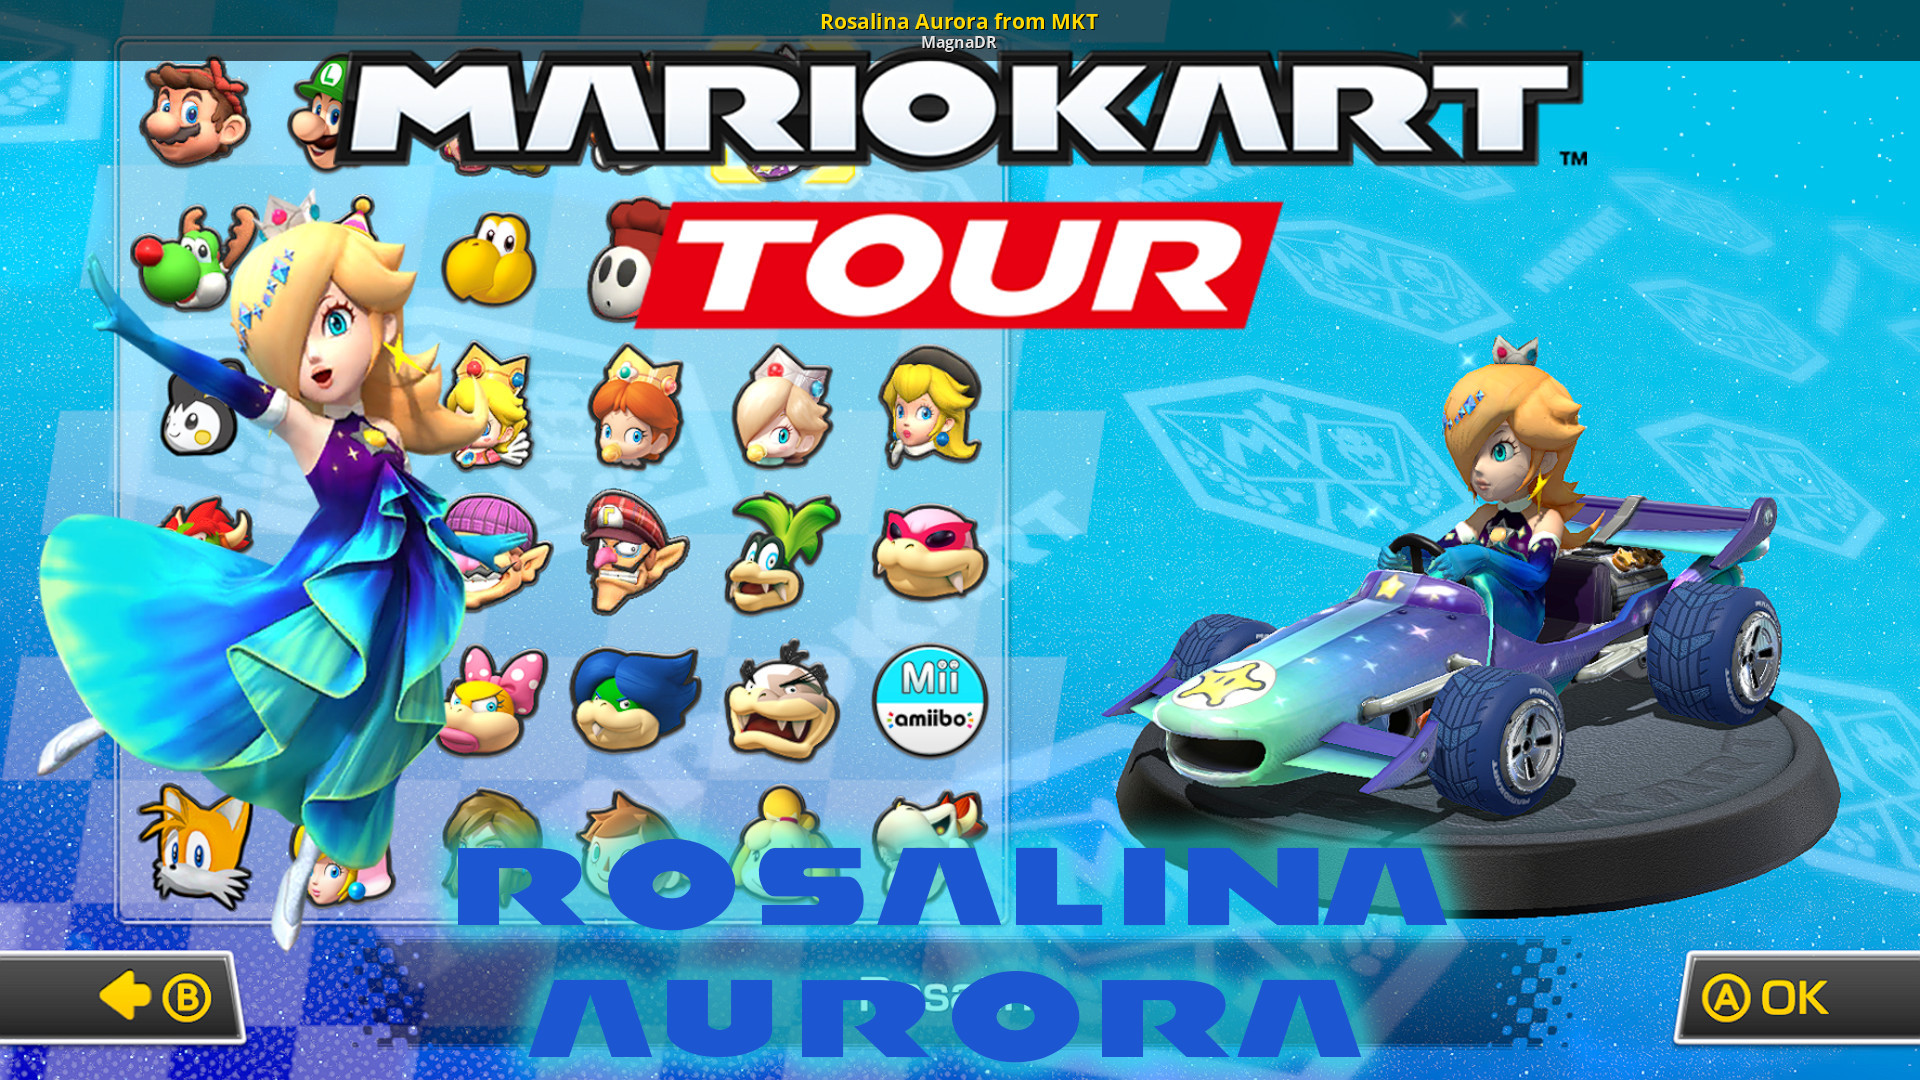 A Mario Kart 8 (MK8) Mod in the Rosalina category, submitted by MagnaDR.